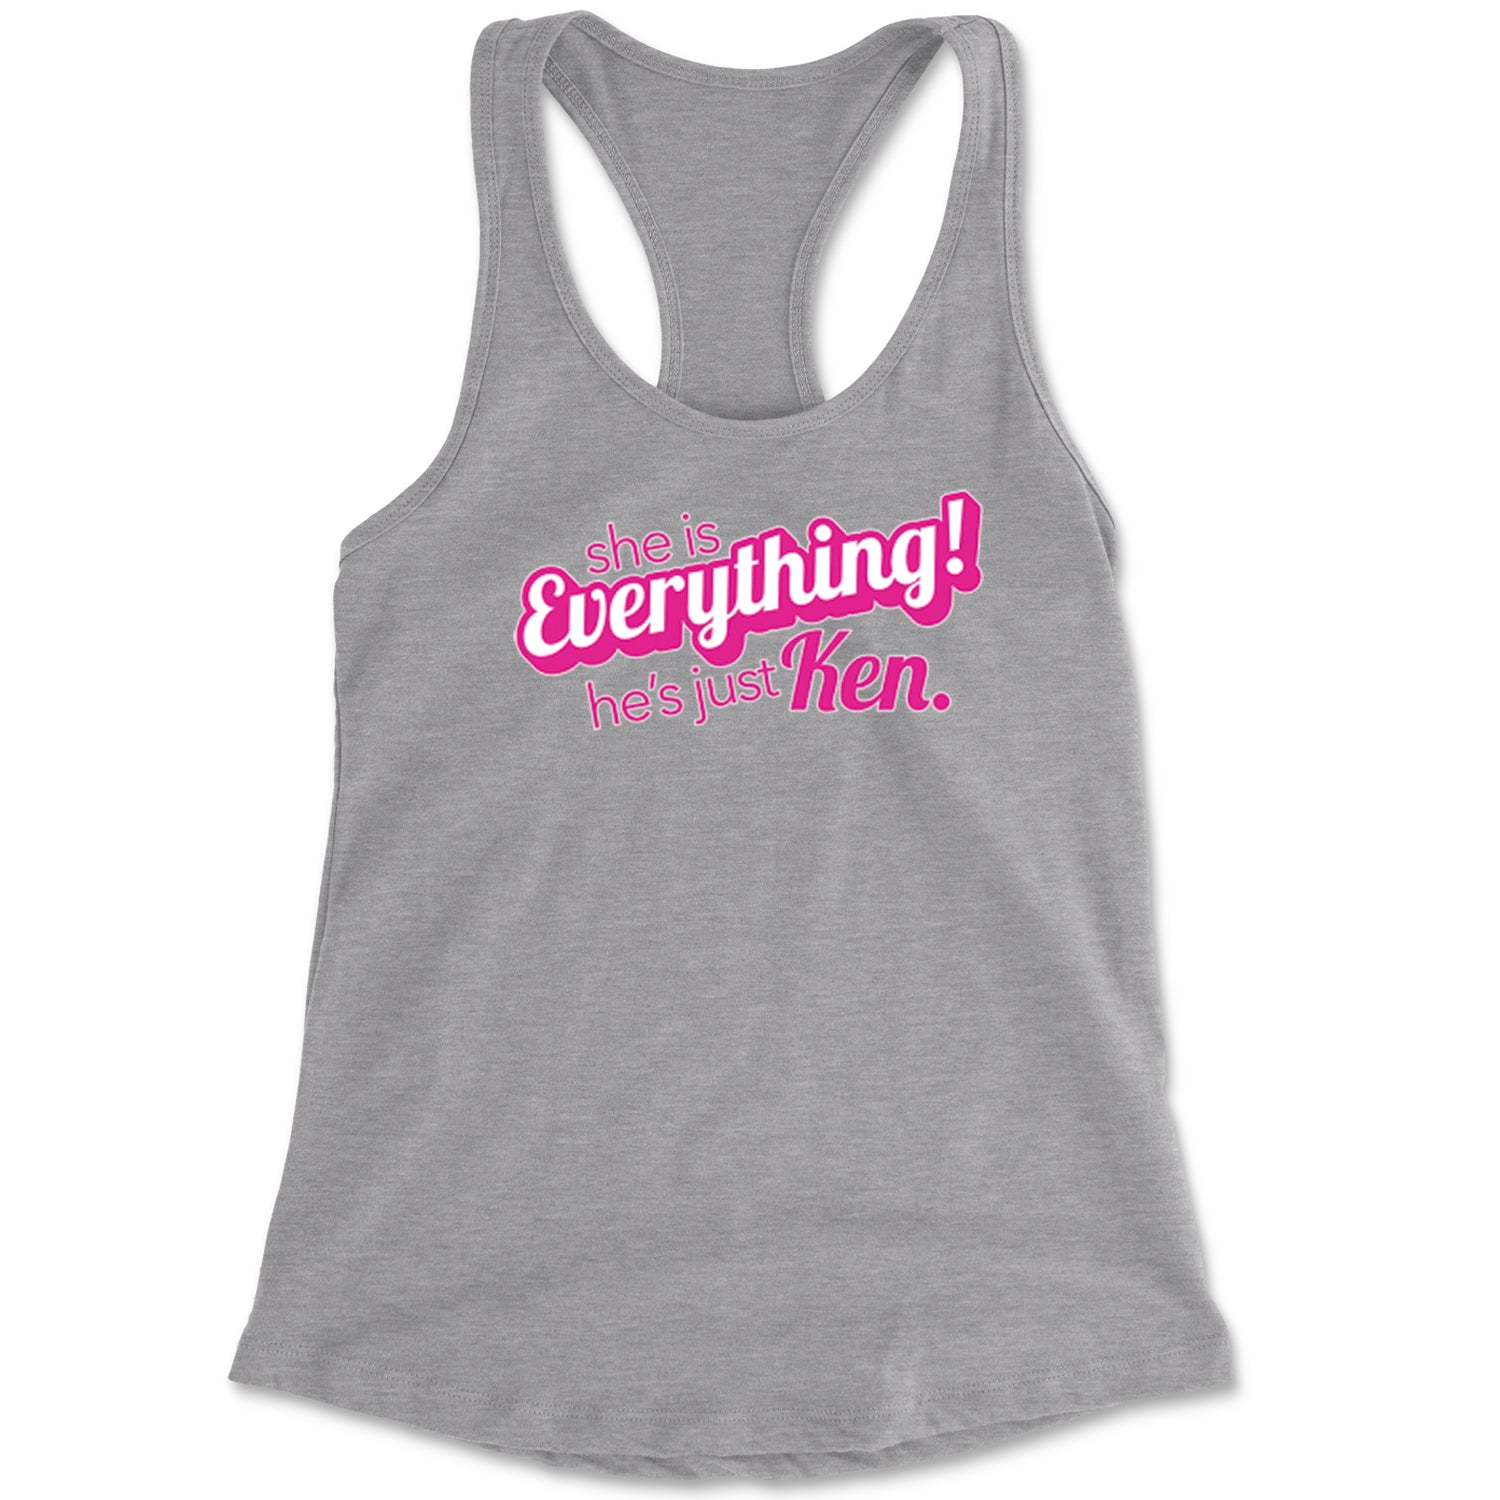 She's Everything, He's Just Ken Racerback Tank Top for Women